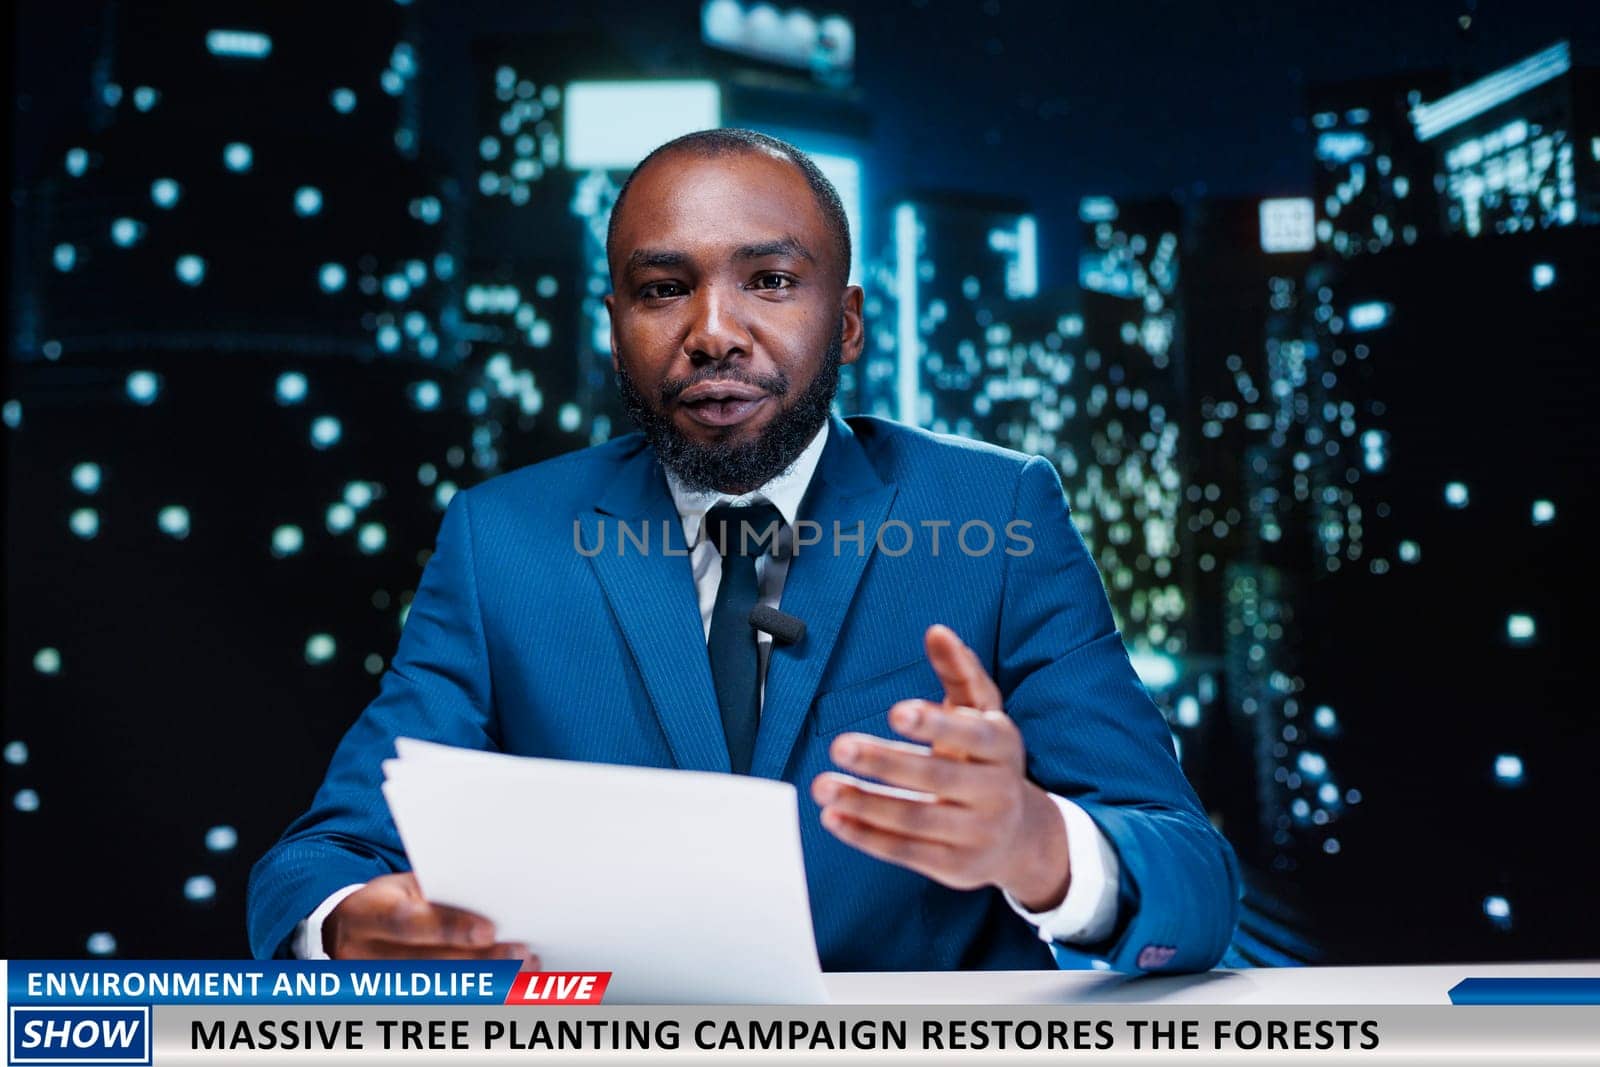 Journalist reveals environment program to plant trees and help preserve forests, breaking news on night show. Presenter talking about saving the planet and protecting natural regions, world events.